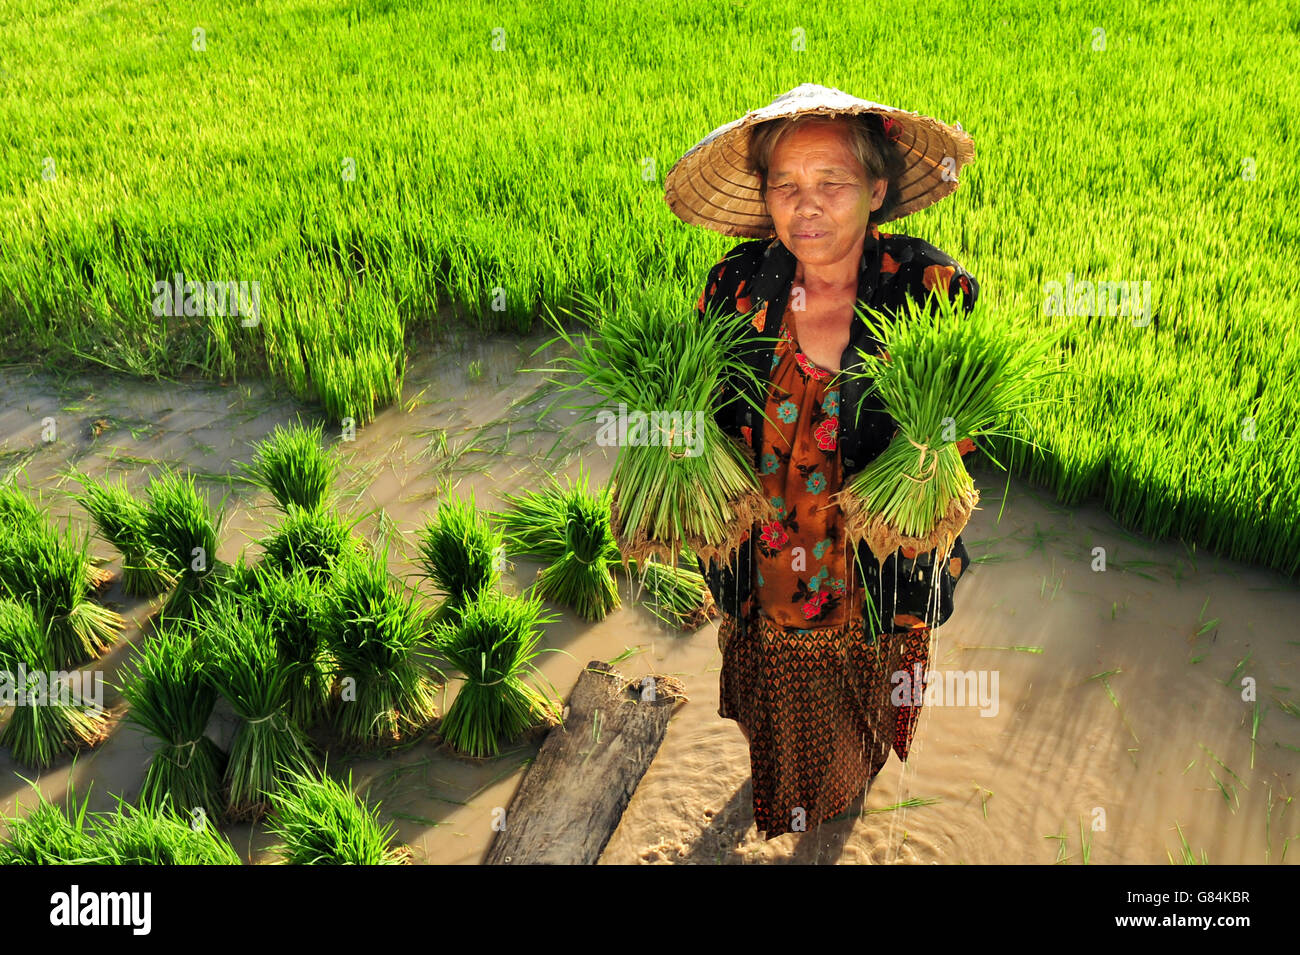 Woman holding rice plants in paddy field, Thailand Stock Photo